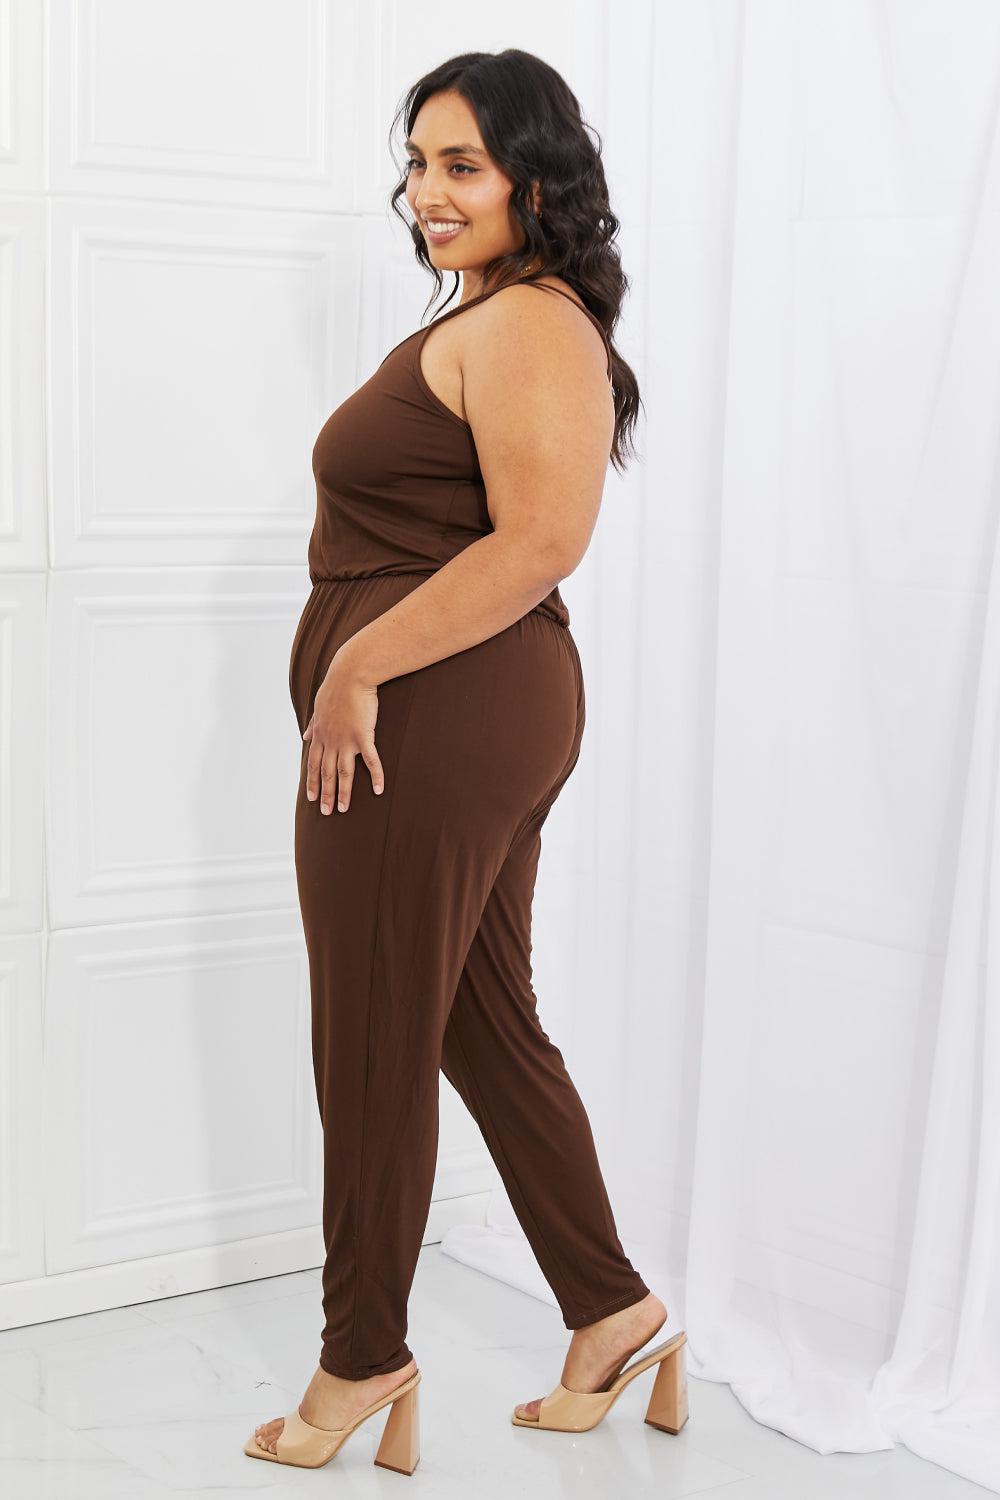 Capella Comfy Casual Full Size Solid Elastic Waistband Jumpsuit in Chocolate BLUE ZONE PLANET